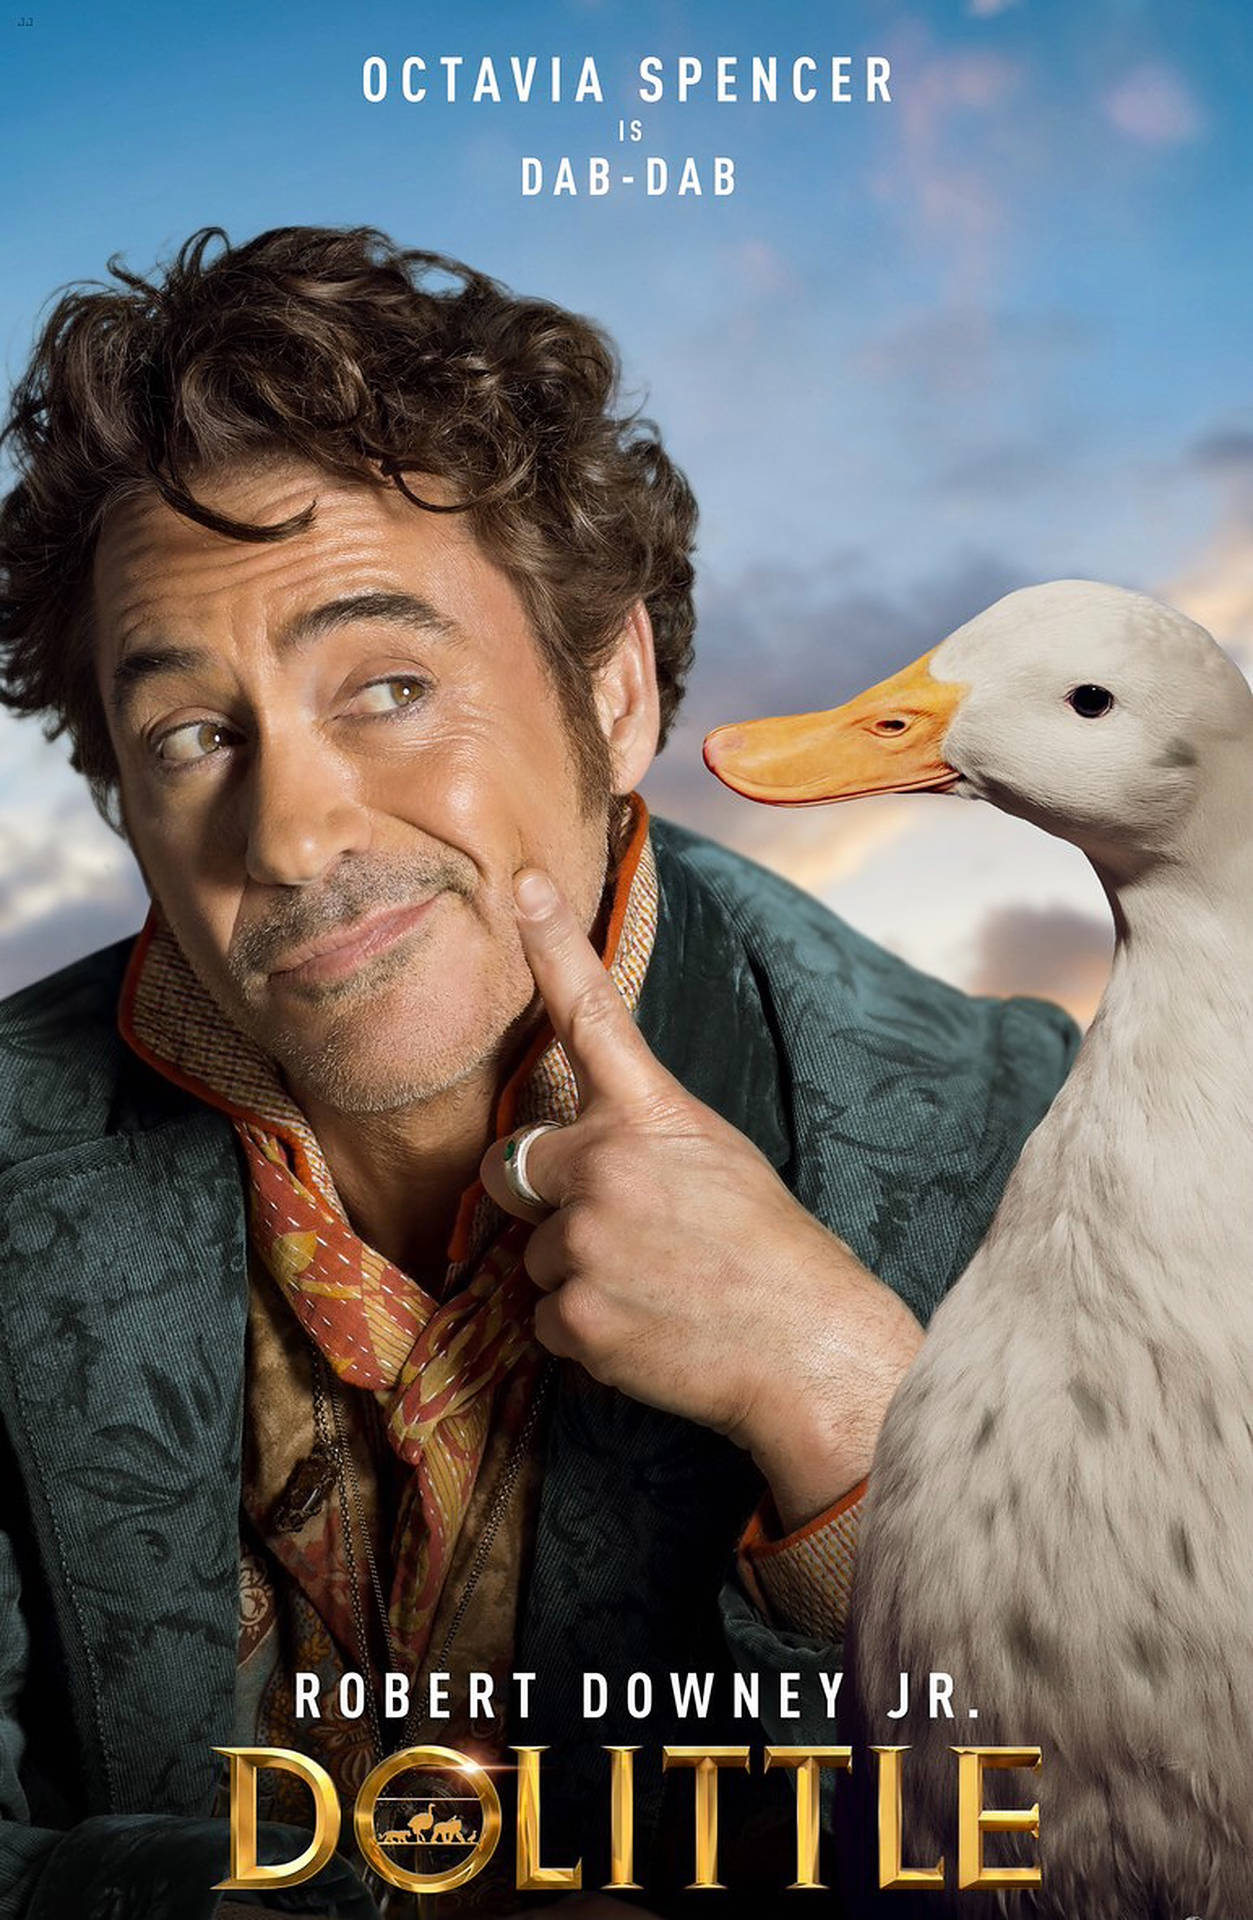 Dolittle And Dab-Dab Duck Wallpaper